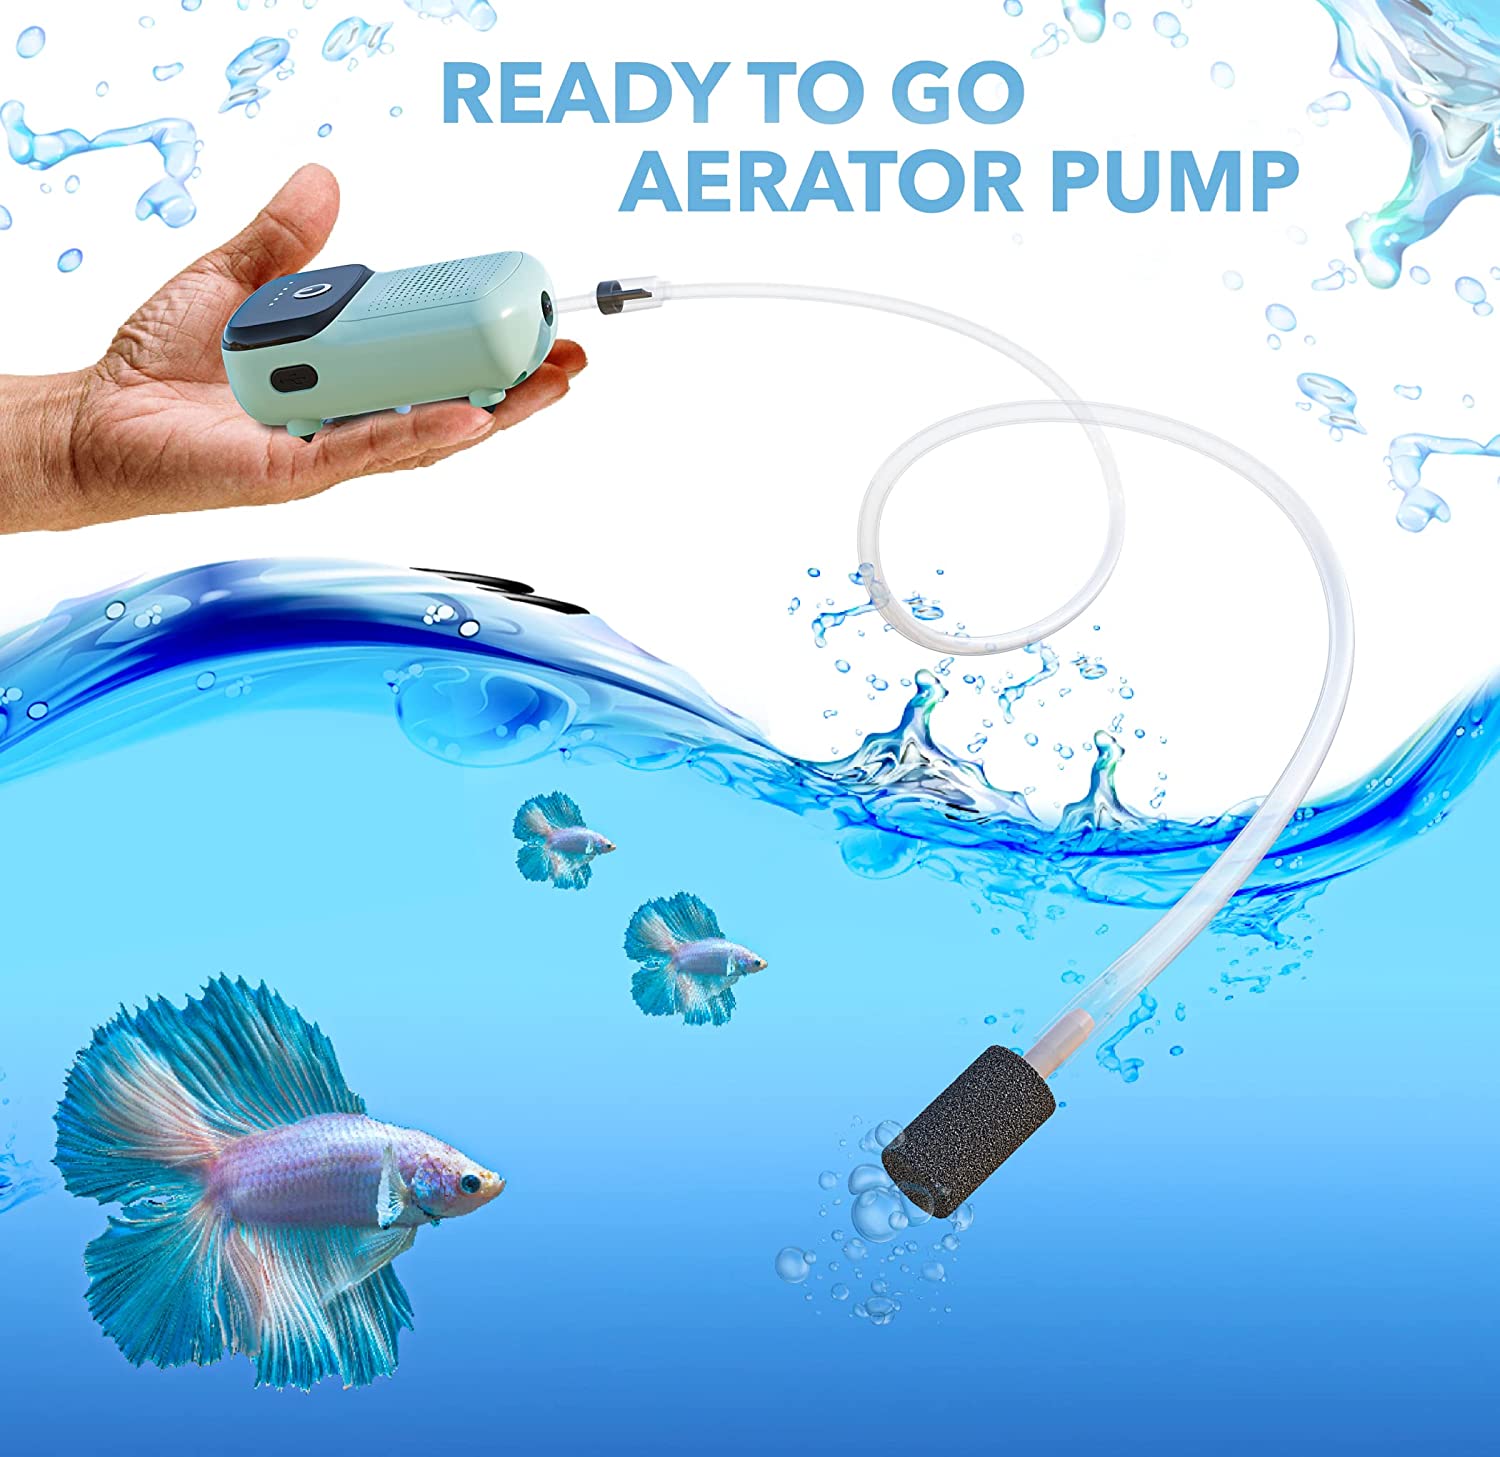 Battery-Operated Portable Outdoor Fishing Oxygen Pump Fish Tank